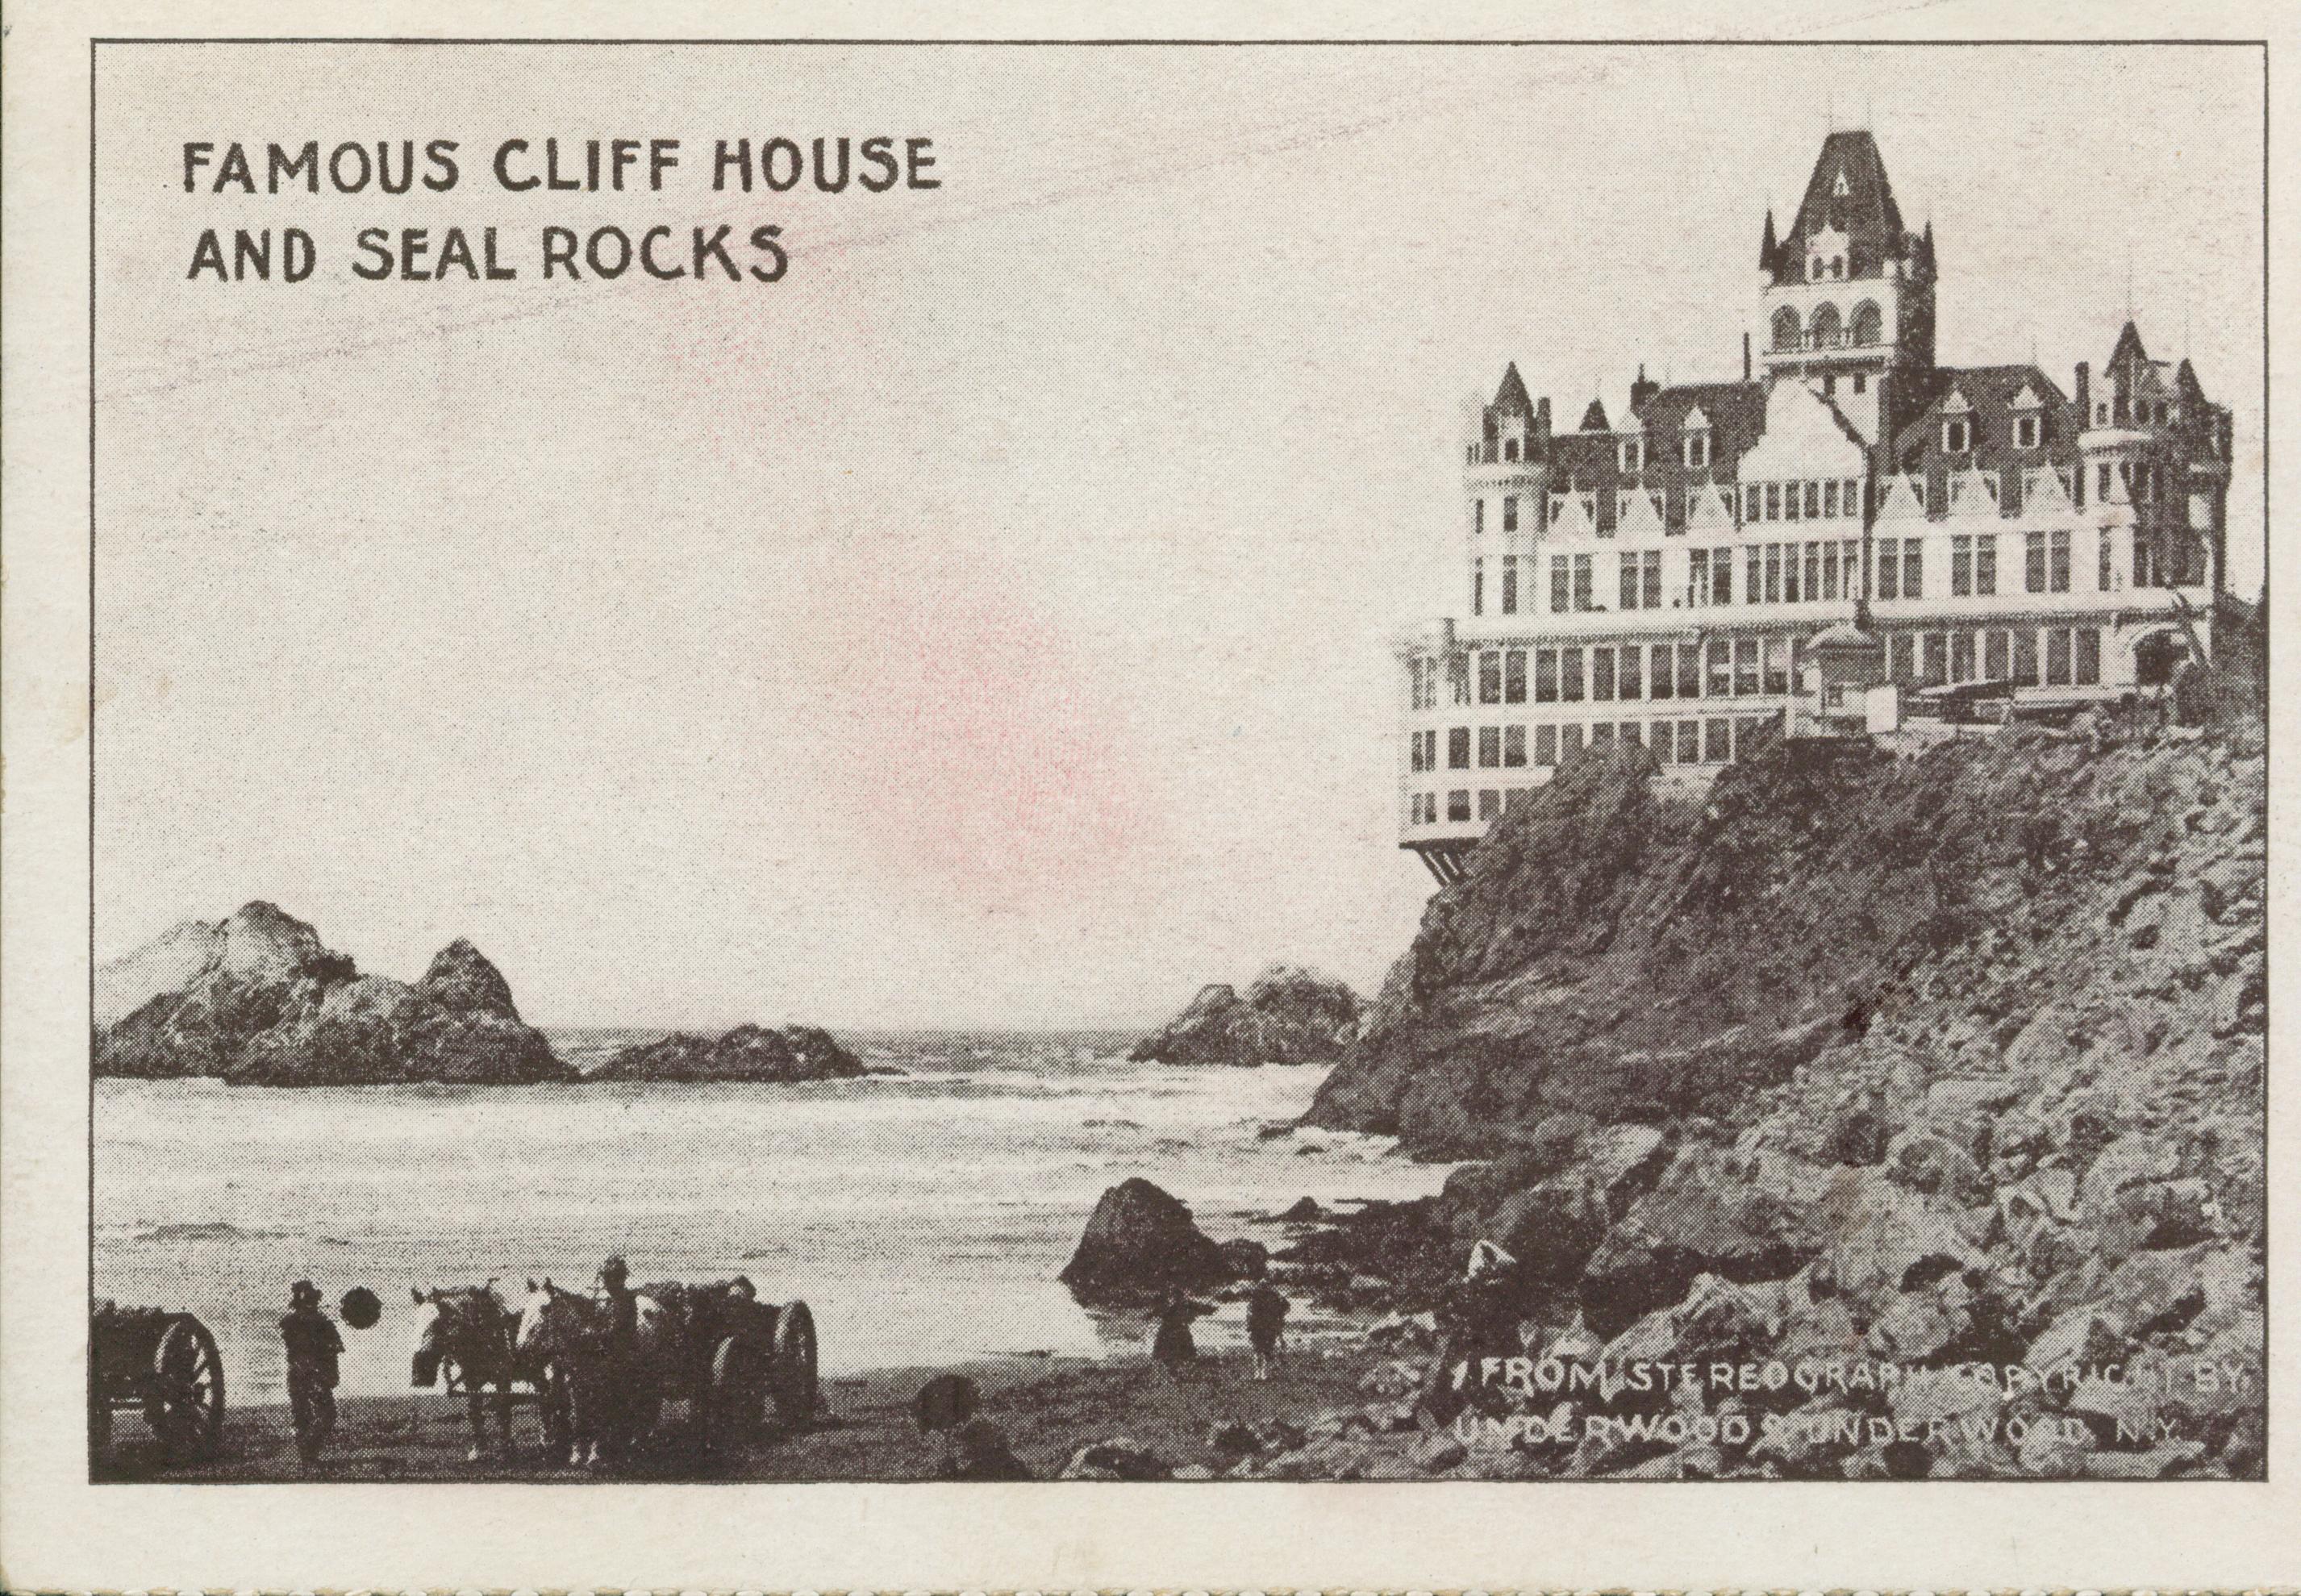 Shows the Cliff House and Seal Rocks with onlookers on the beach